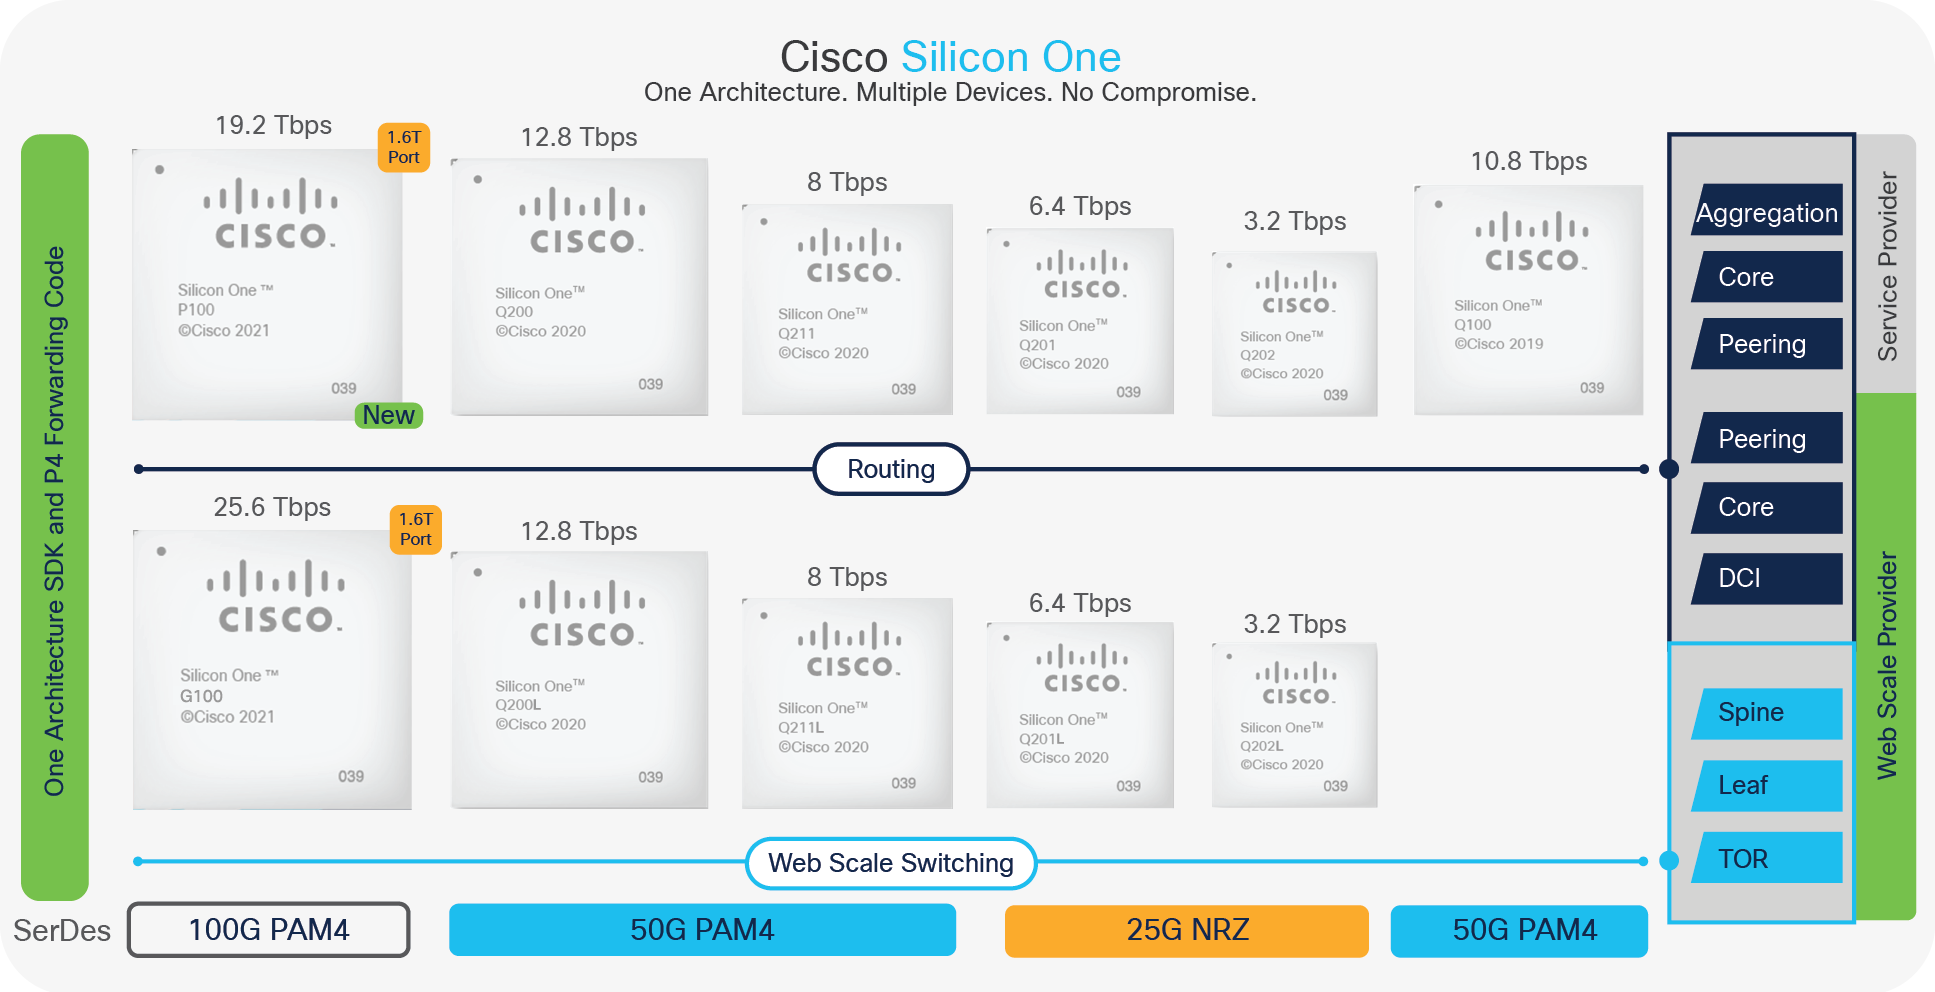 A glance at the Cisco Silicon One family shows the number of products available with the 50G SerDes (blue).